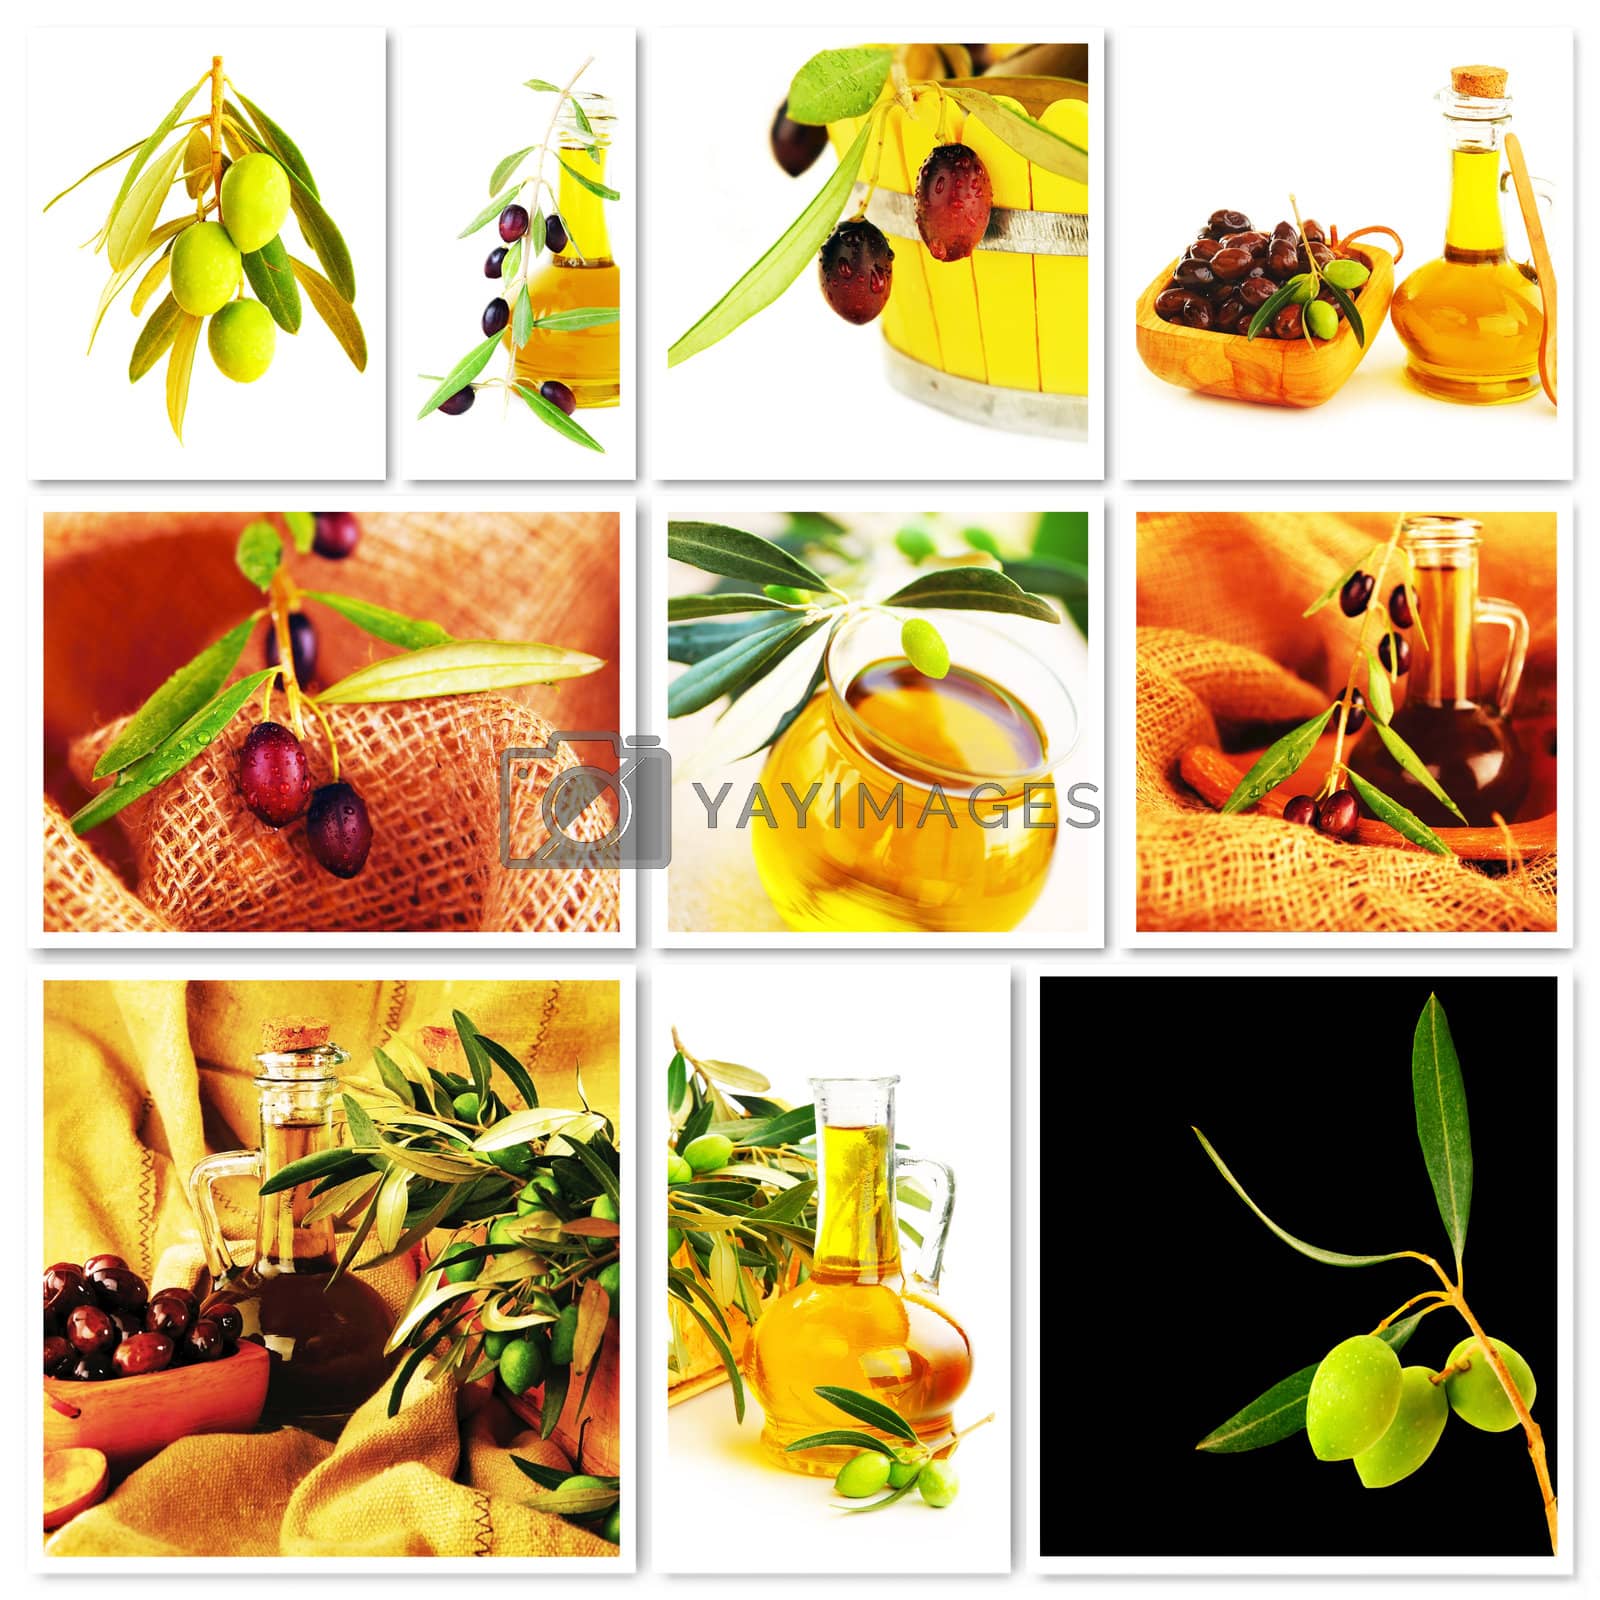 Royalty free image of Olives collage by Anna_Omelchenko